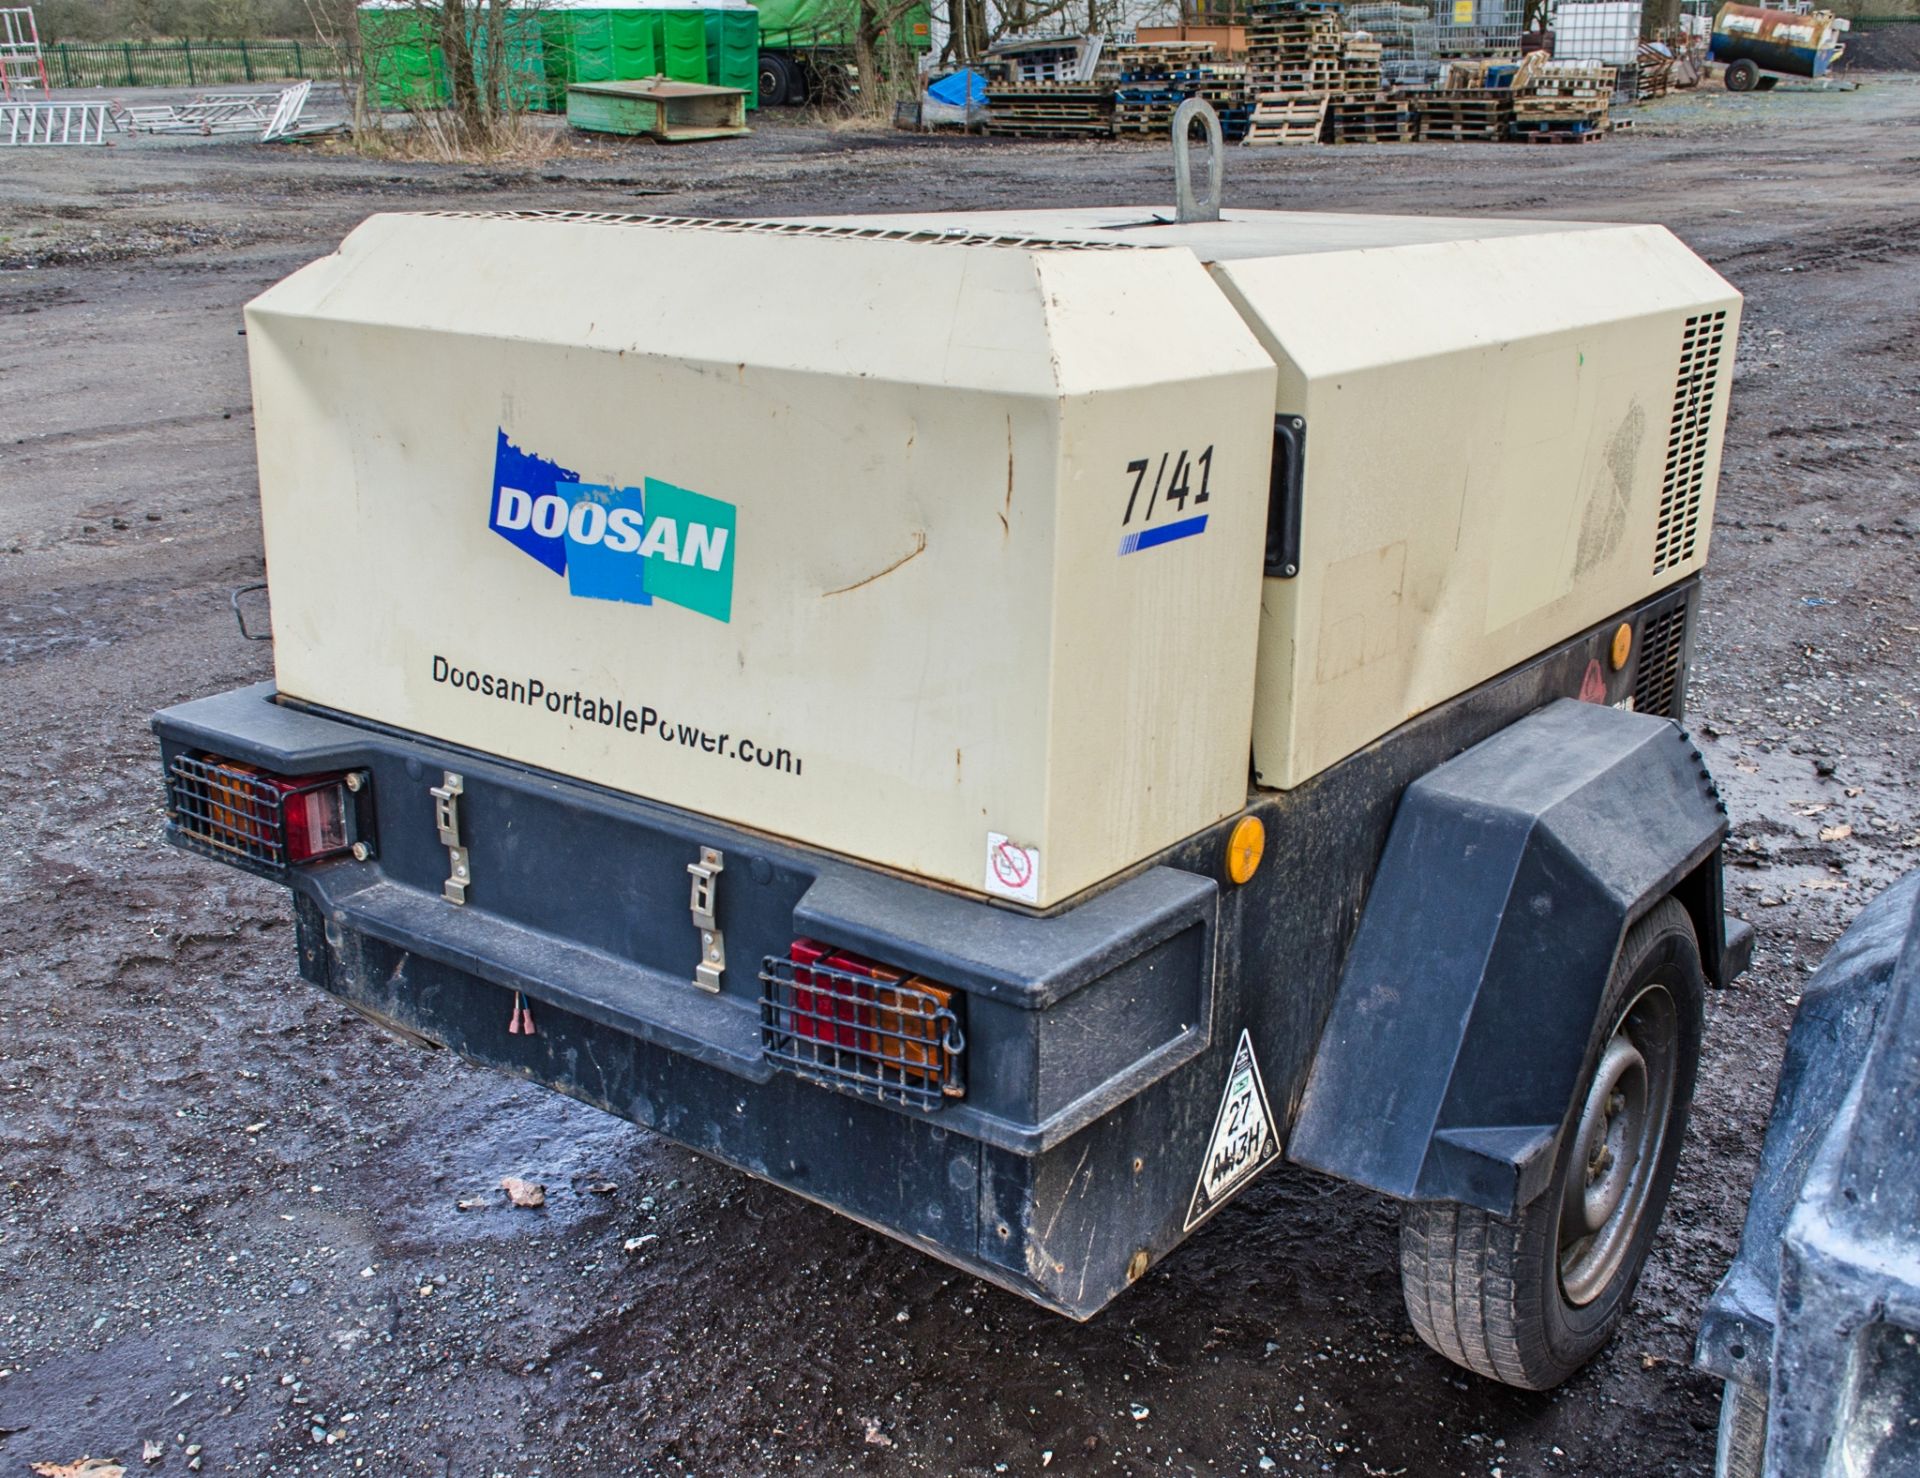 Doosan 7/41 diesel driven fast tow mobile air compressor Year: 2013 S/N: 431975 Recorded Hours: 1369 - Image 2 of 7